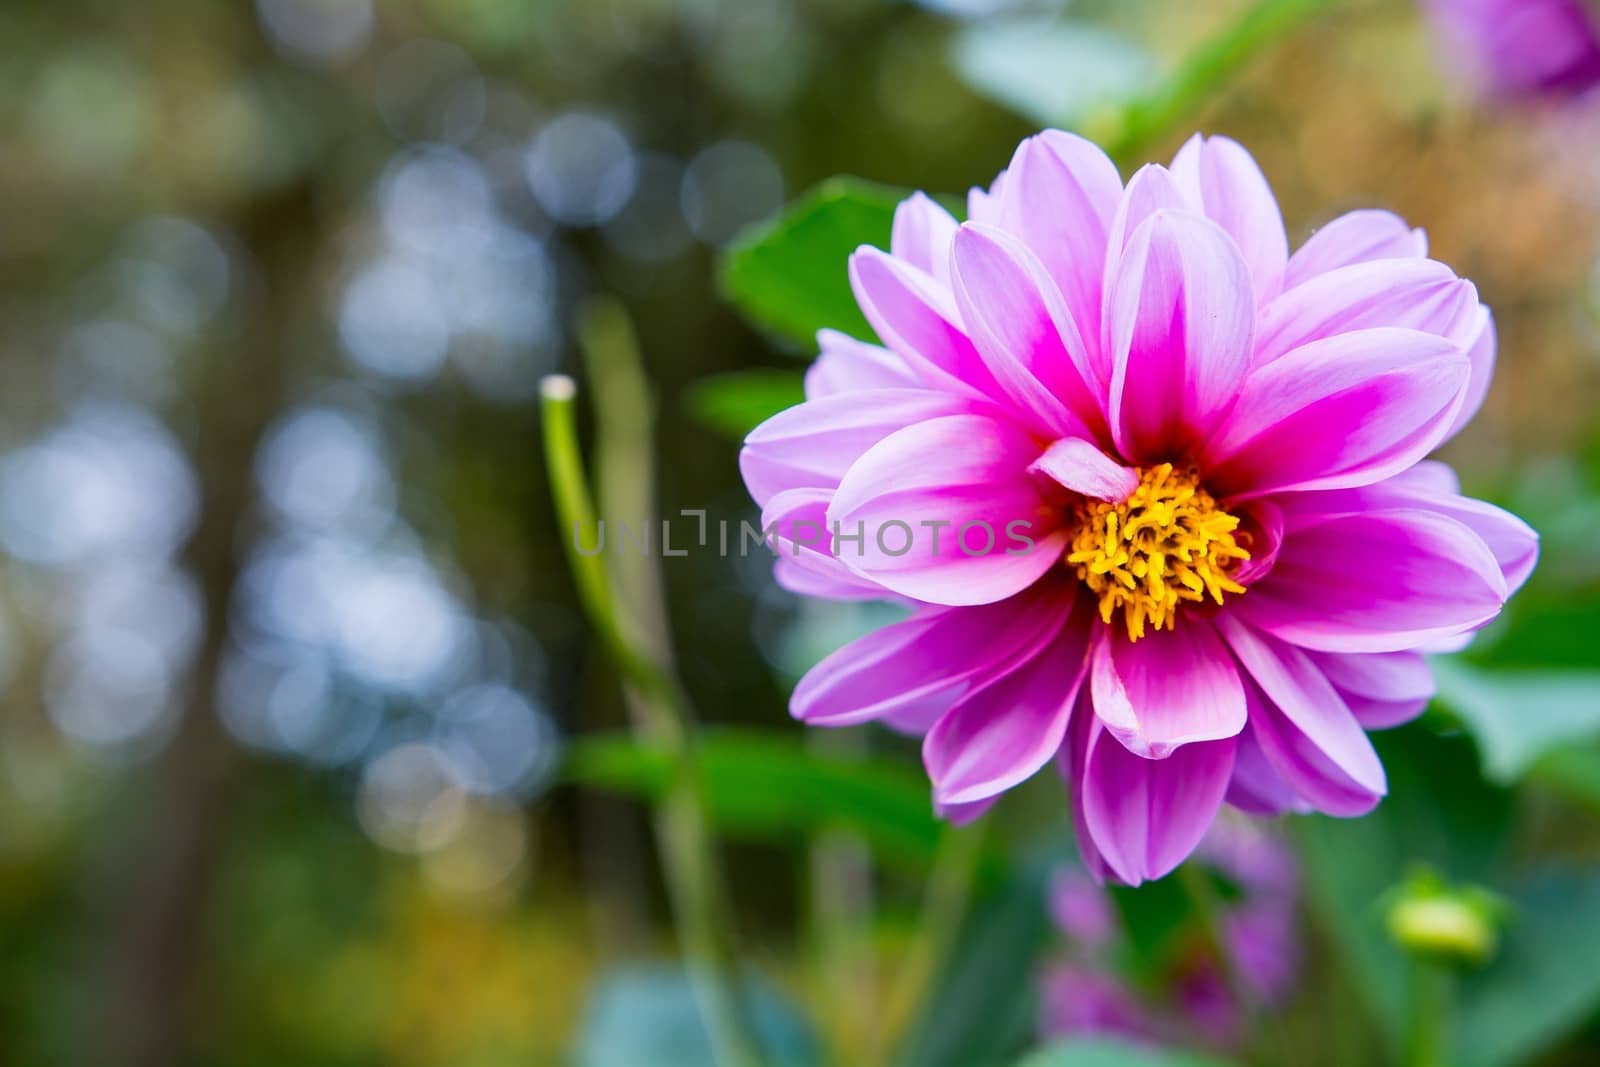 Flower with nice pink blossom and green blurred background.